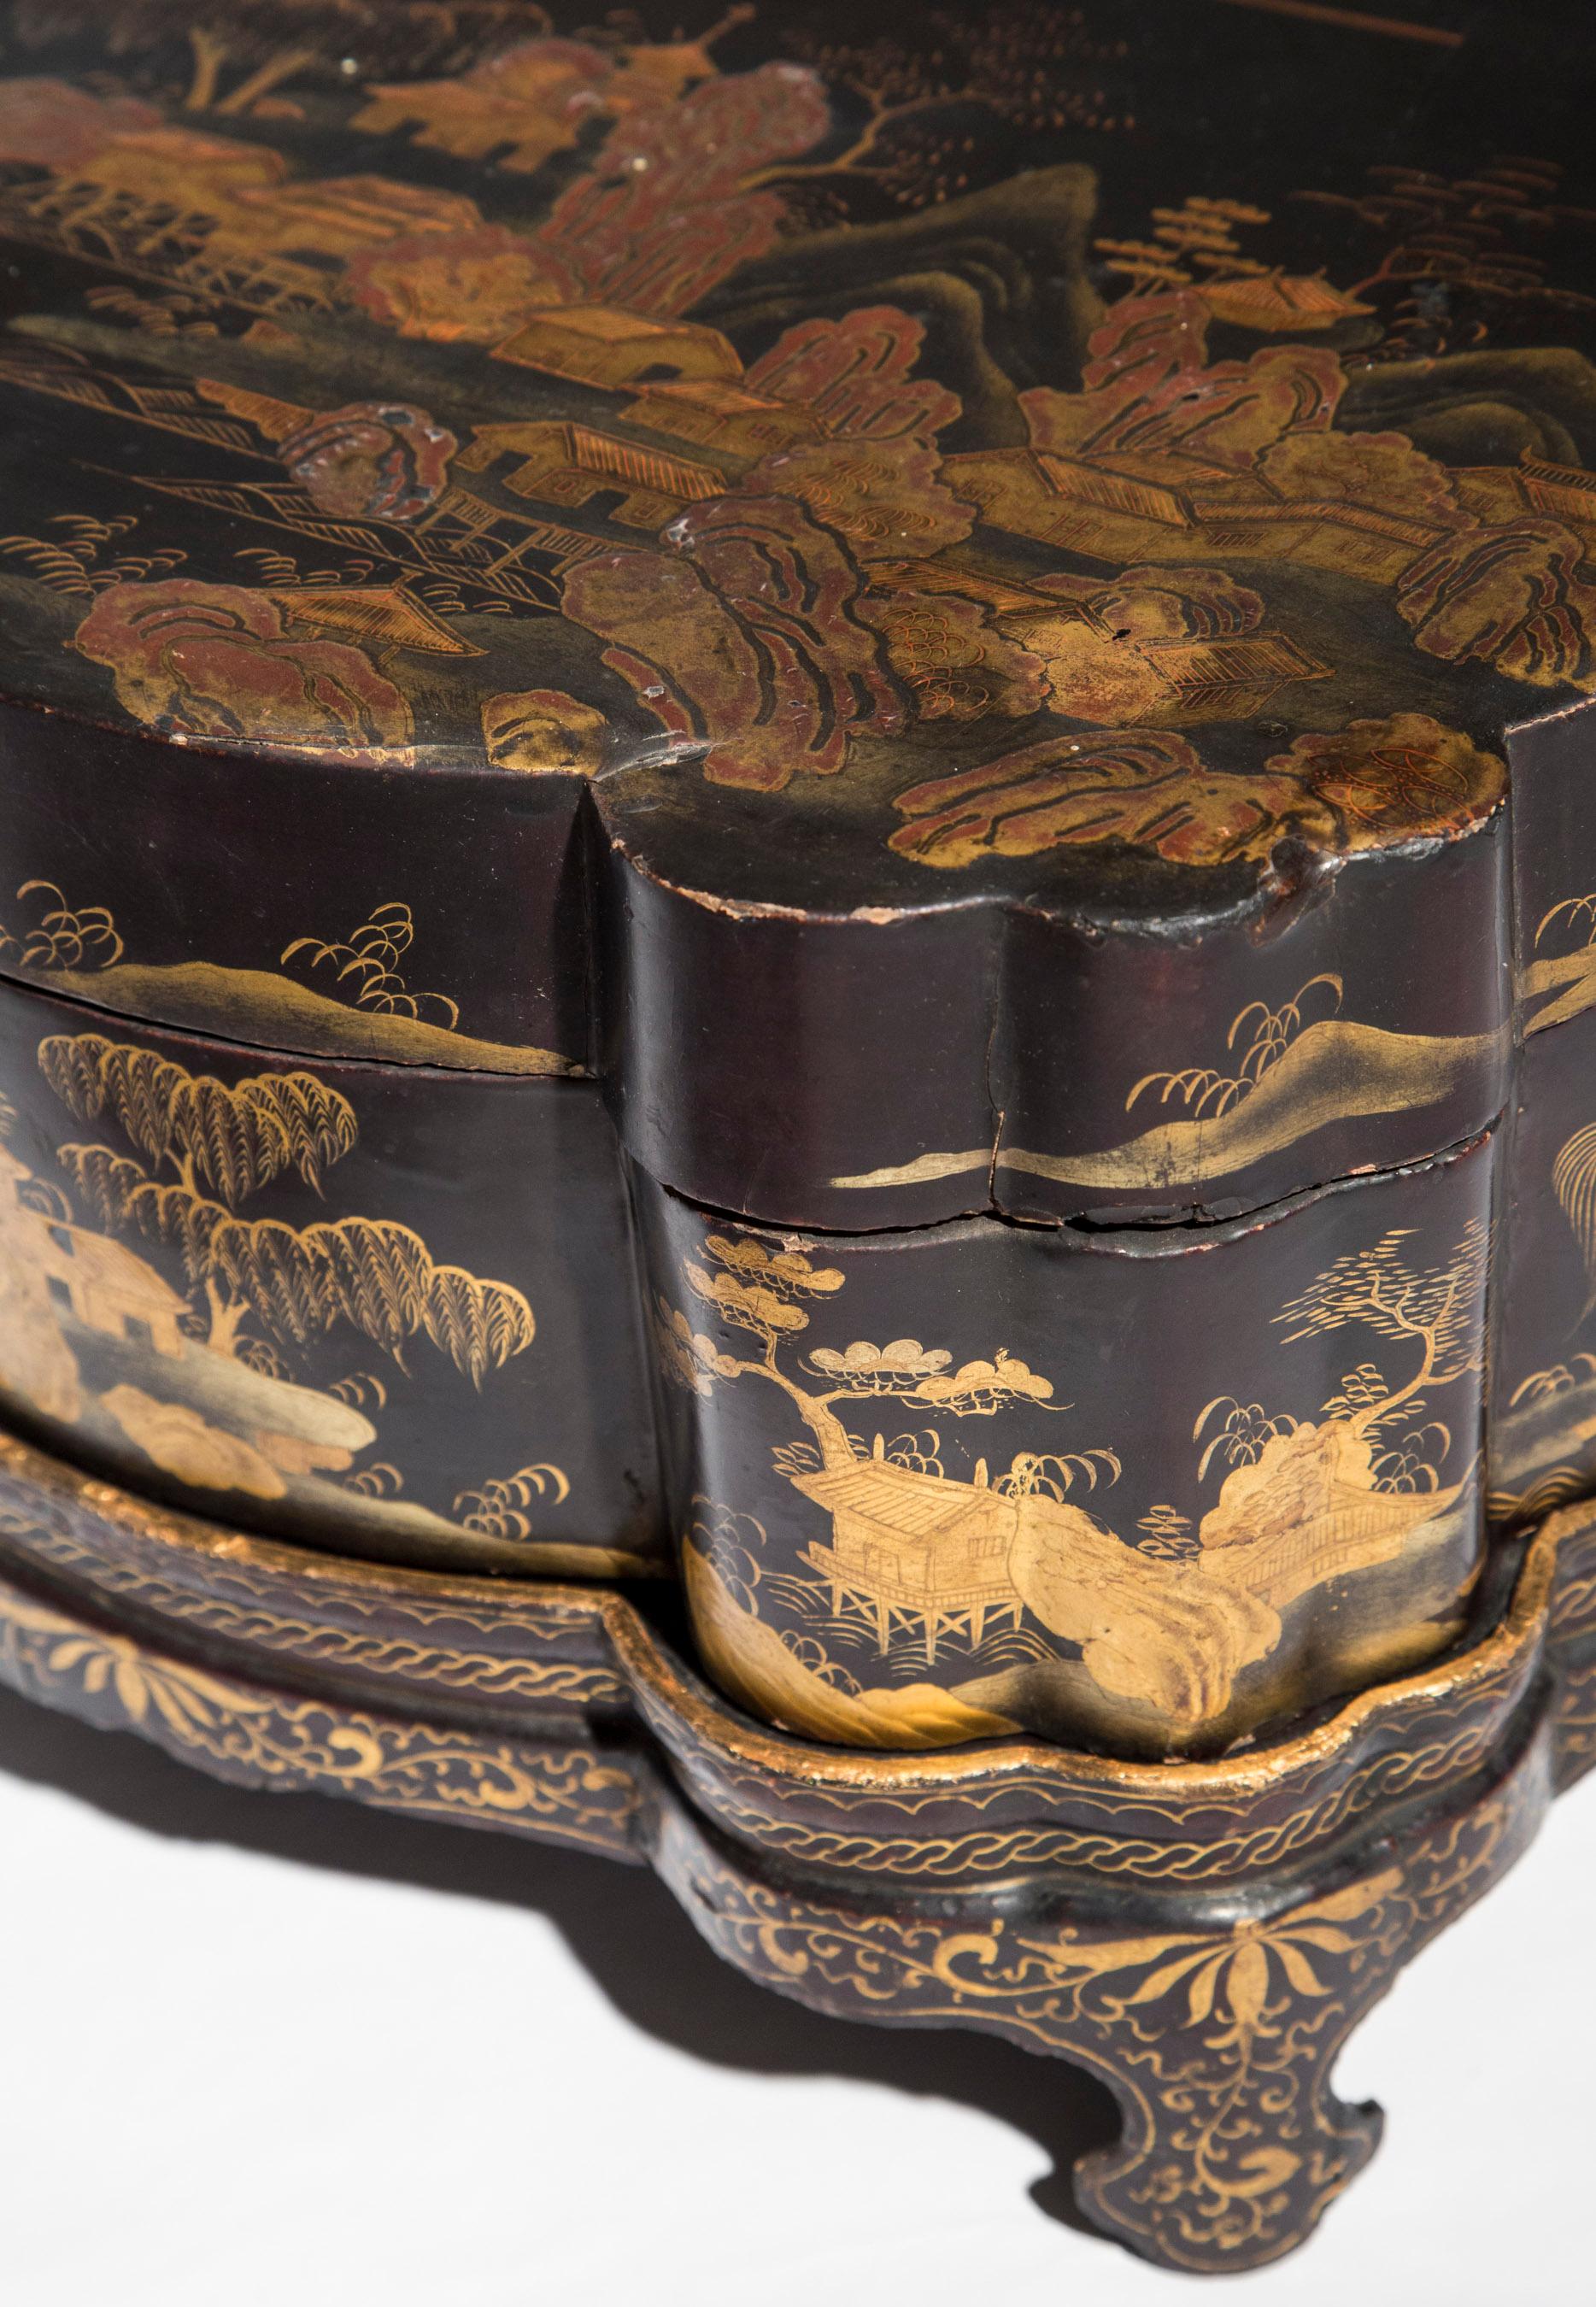 Antique Chinoiserie Lacquer Jewelry Box on Tray, 19th Century 1